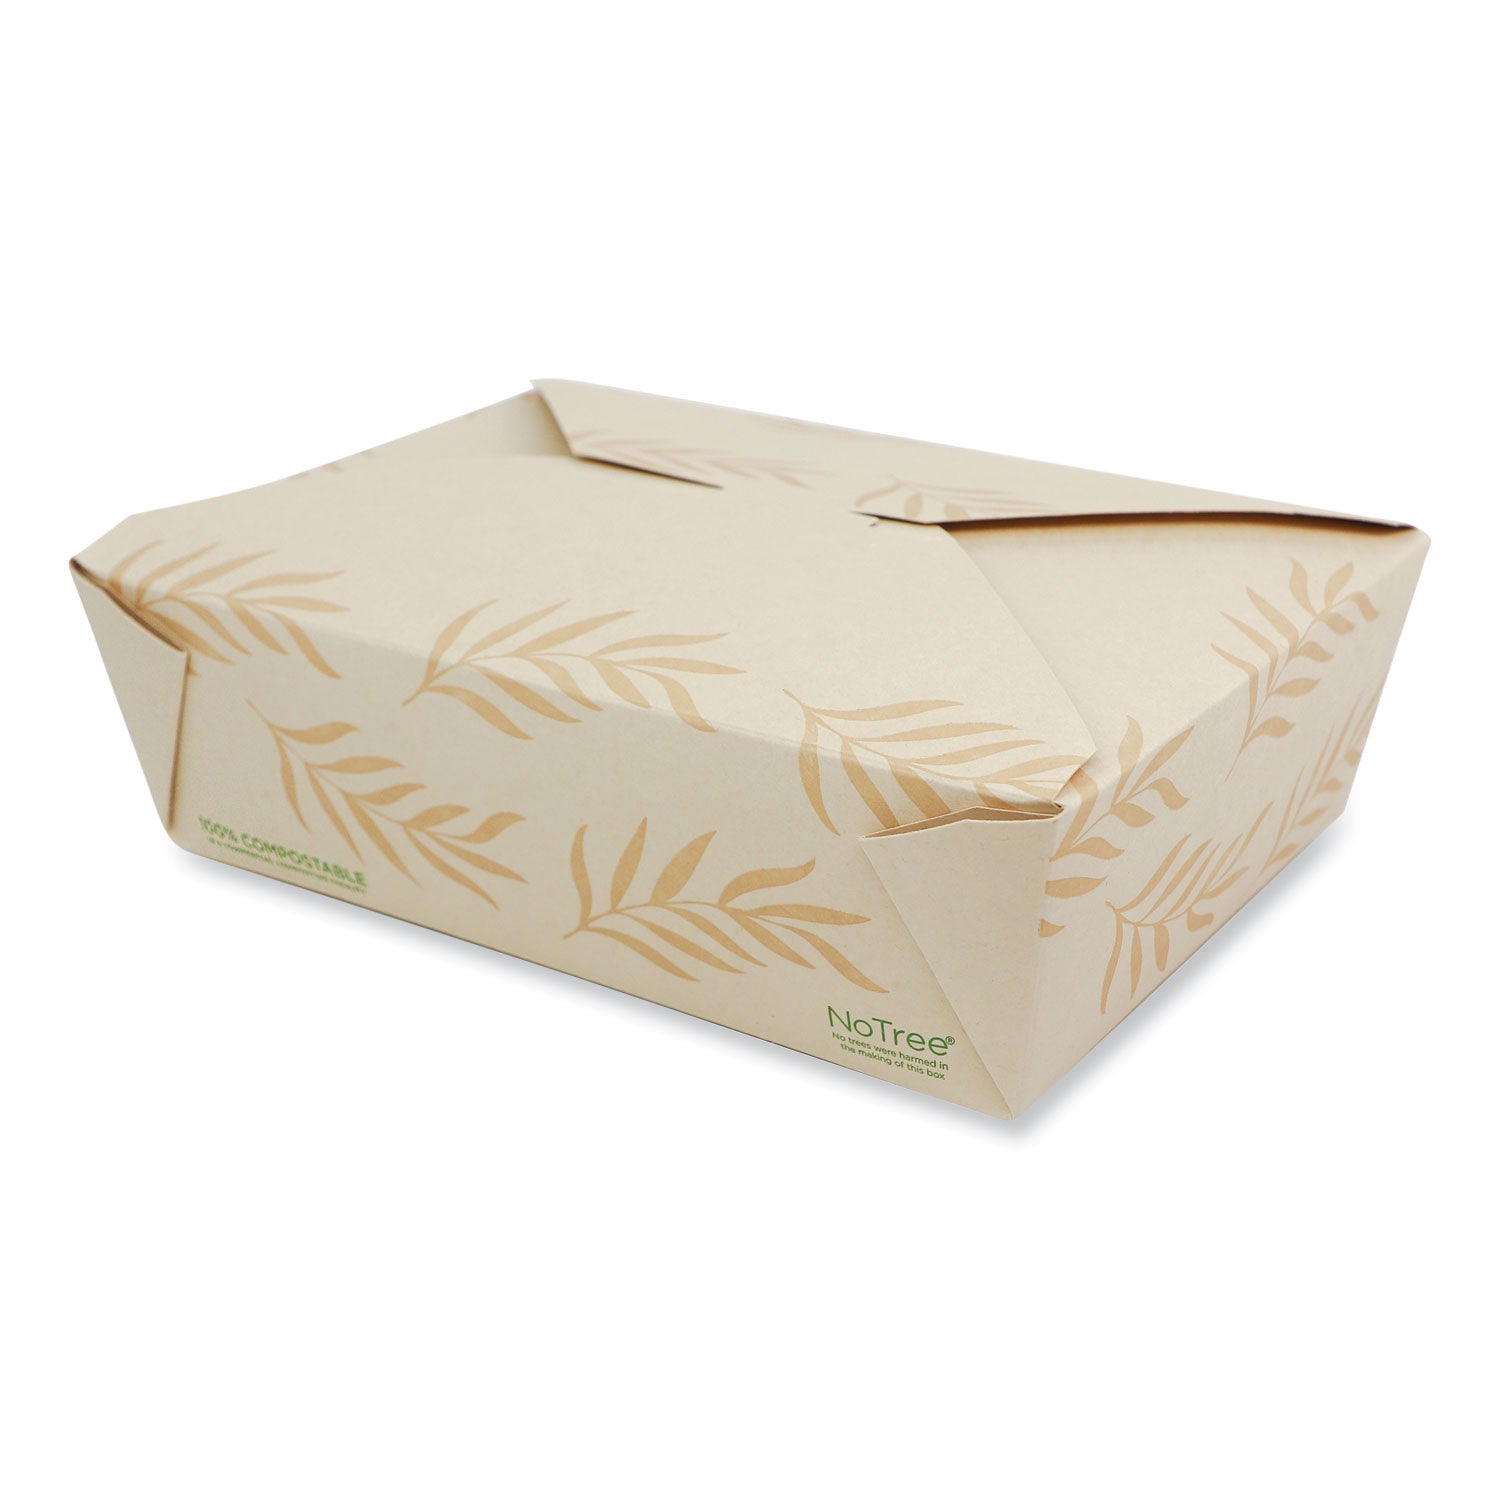 no-tree-folded-takeout-containers-65-oz-625-x-87-x-25-natural-sugarcane-200-carton_wortont3 - 1